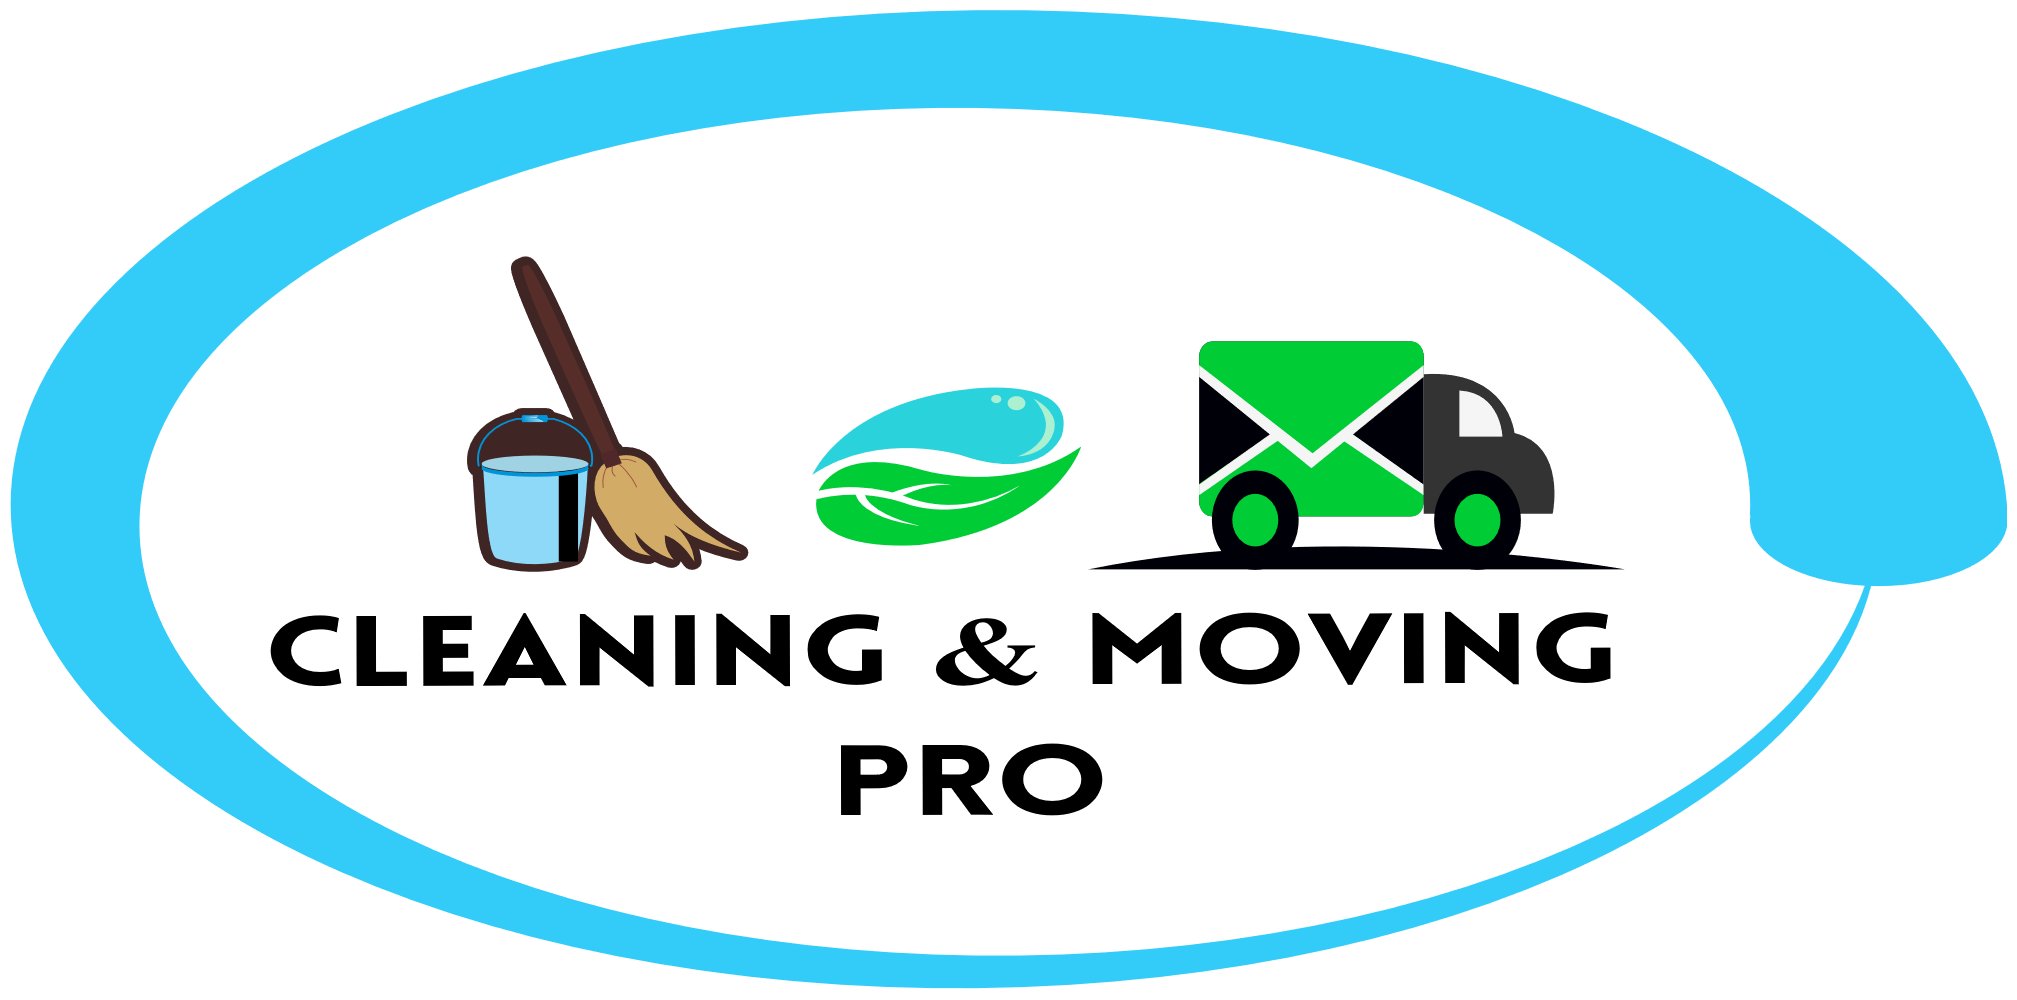 Office cleaning Galway / office cleaning Dublin is our specialty. From toilet cleaning to window cleaning, we do it all. We’ll also provide you with a service that suits you.-CLEANING AND MOVING PRO